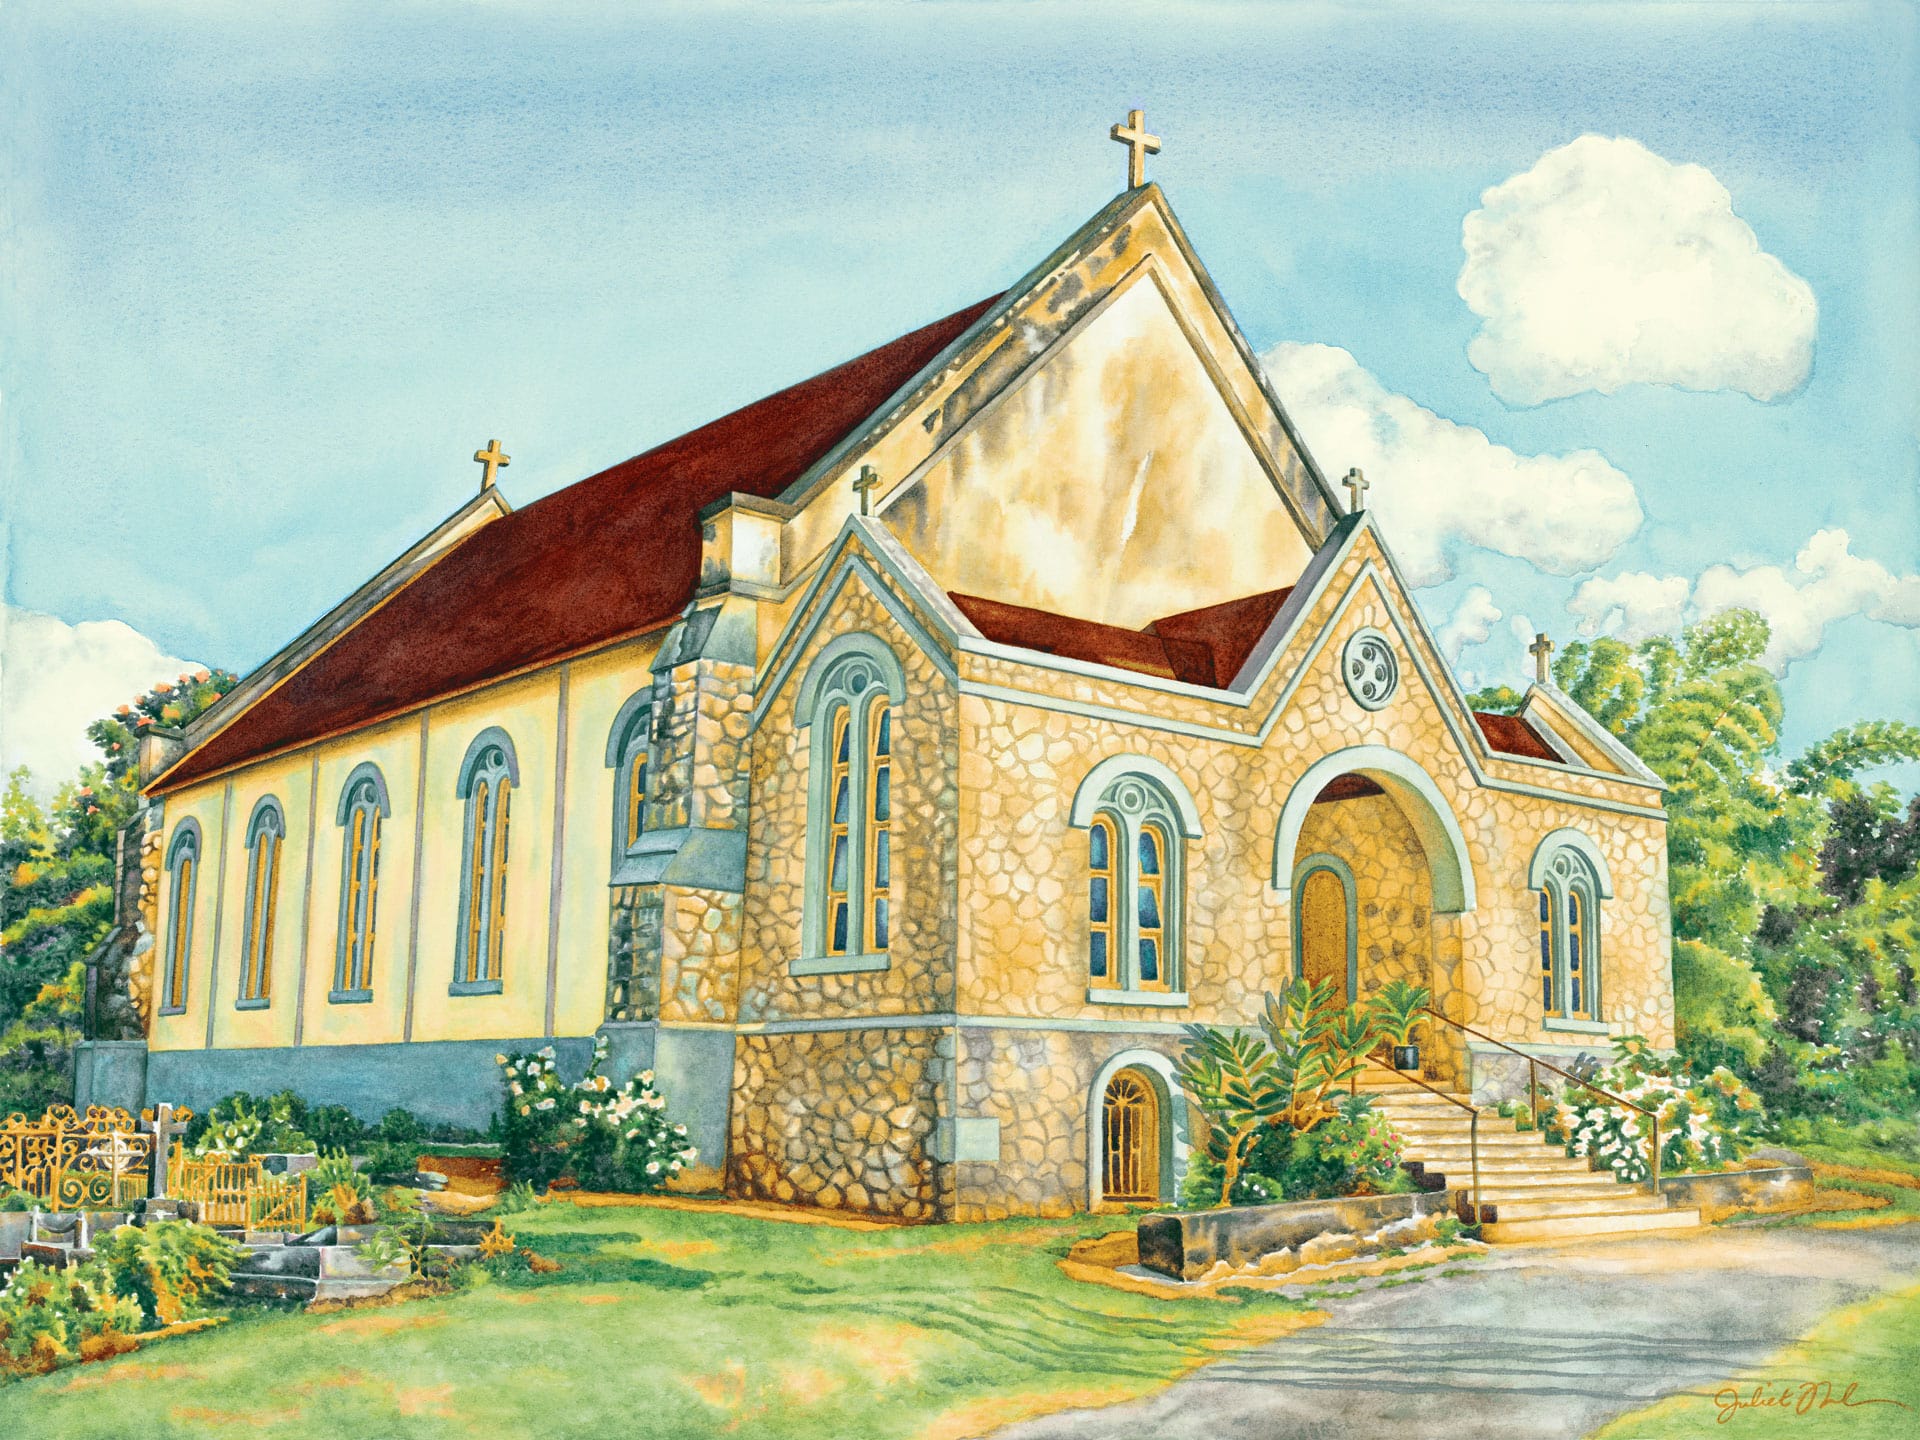 St. Matthew’s Anglican Church, Claremon: Watercolor on paper